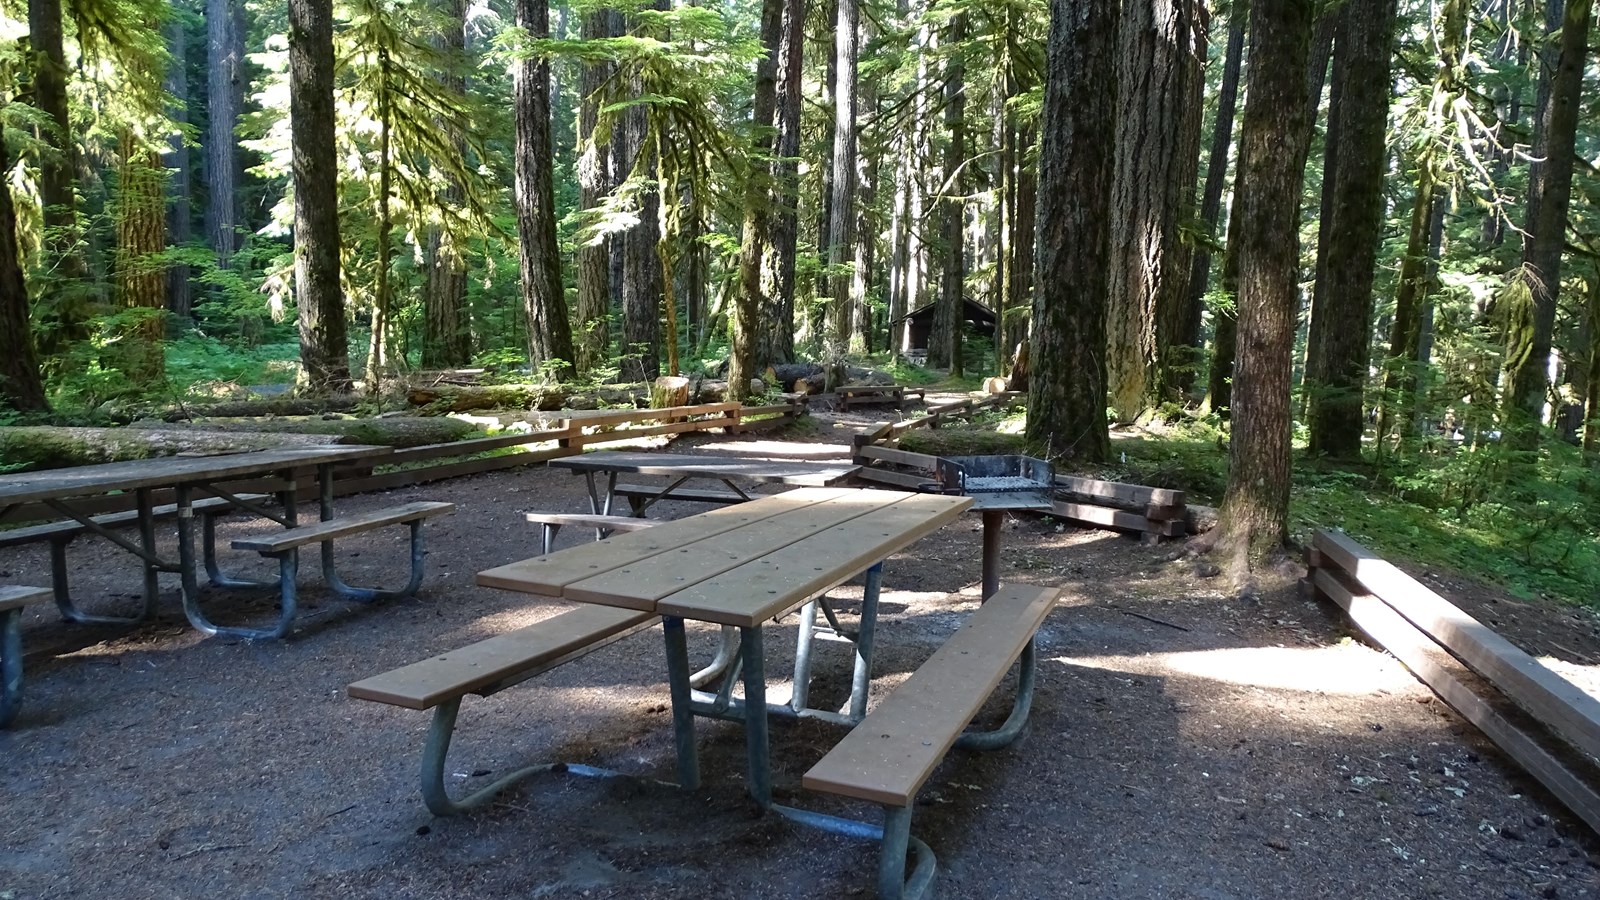 Three picnic tables and a grill surrounded by dense forest with a brown building in the distance.